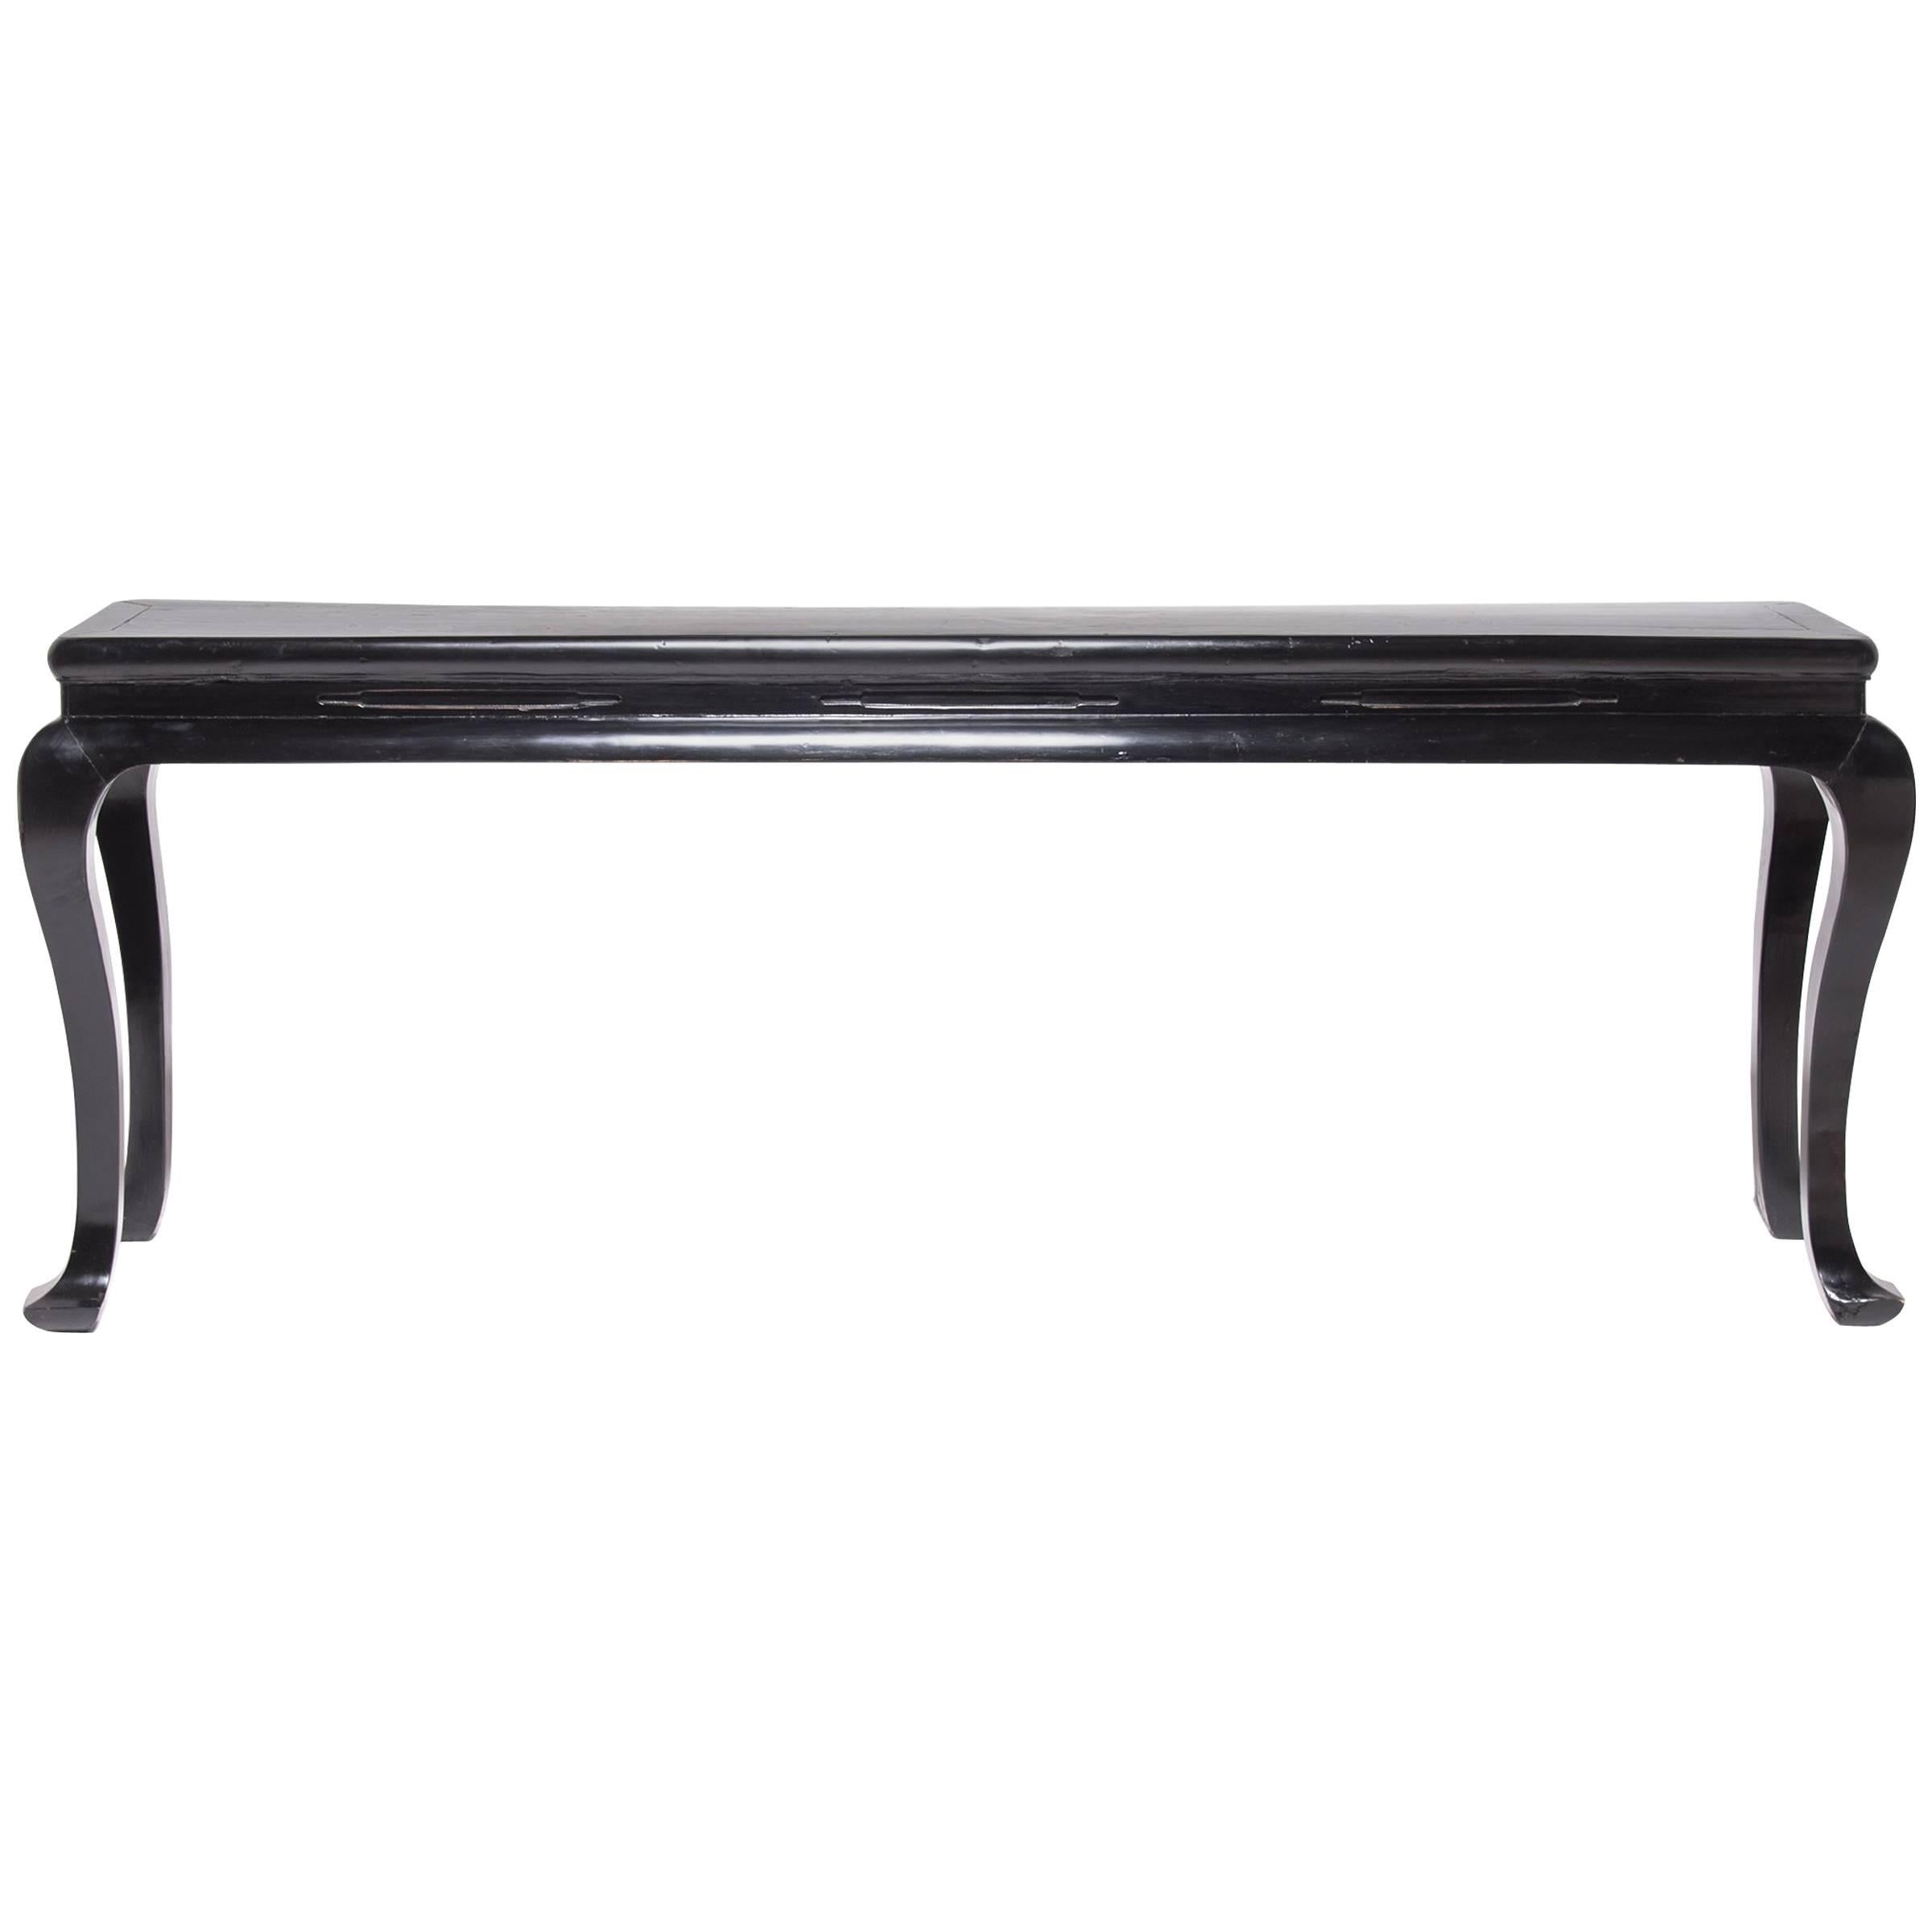 19th Century Chinese Black Lacquer Splayed Foot Altar Table